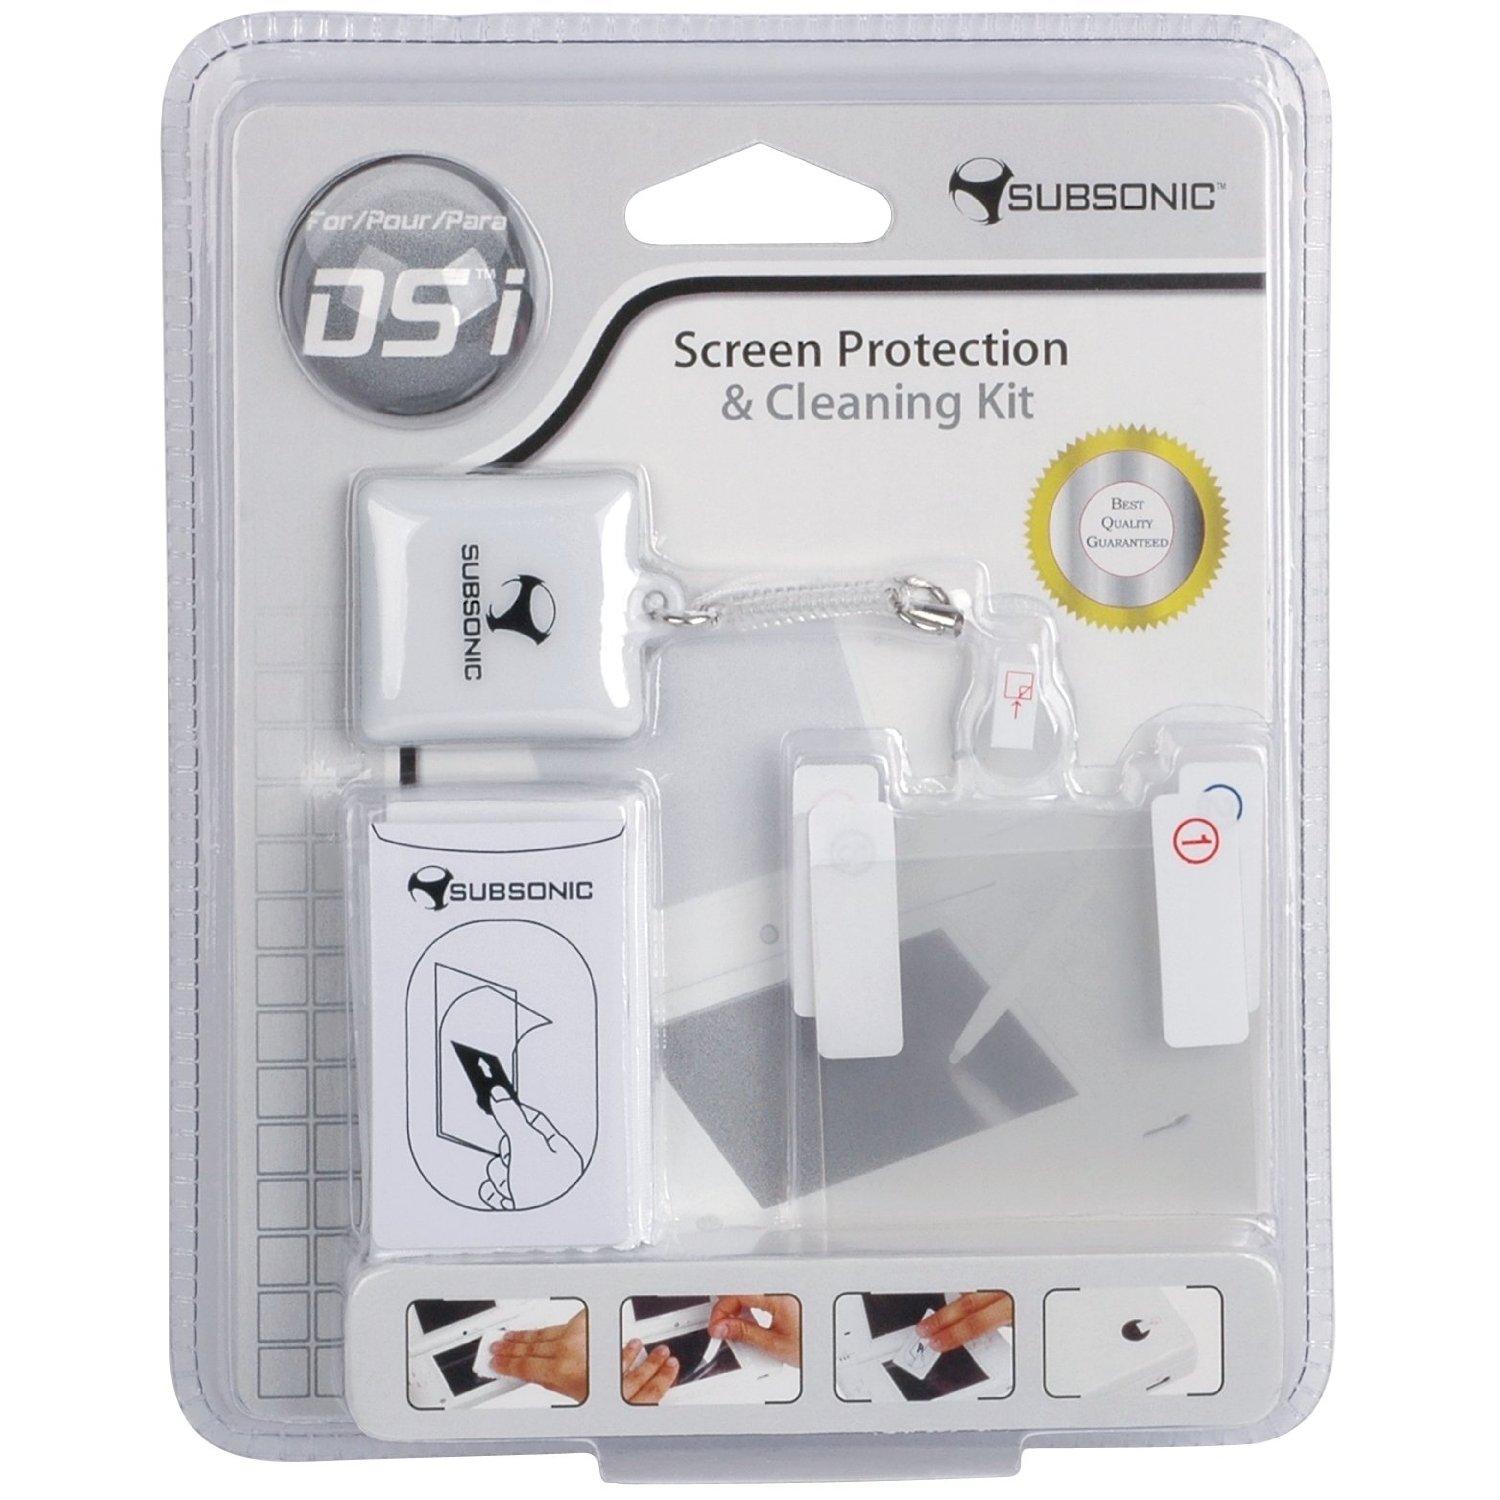 Subsonic DSi Screen Protection and Cleaning Kit